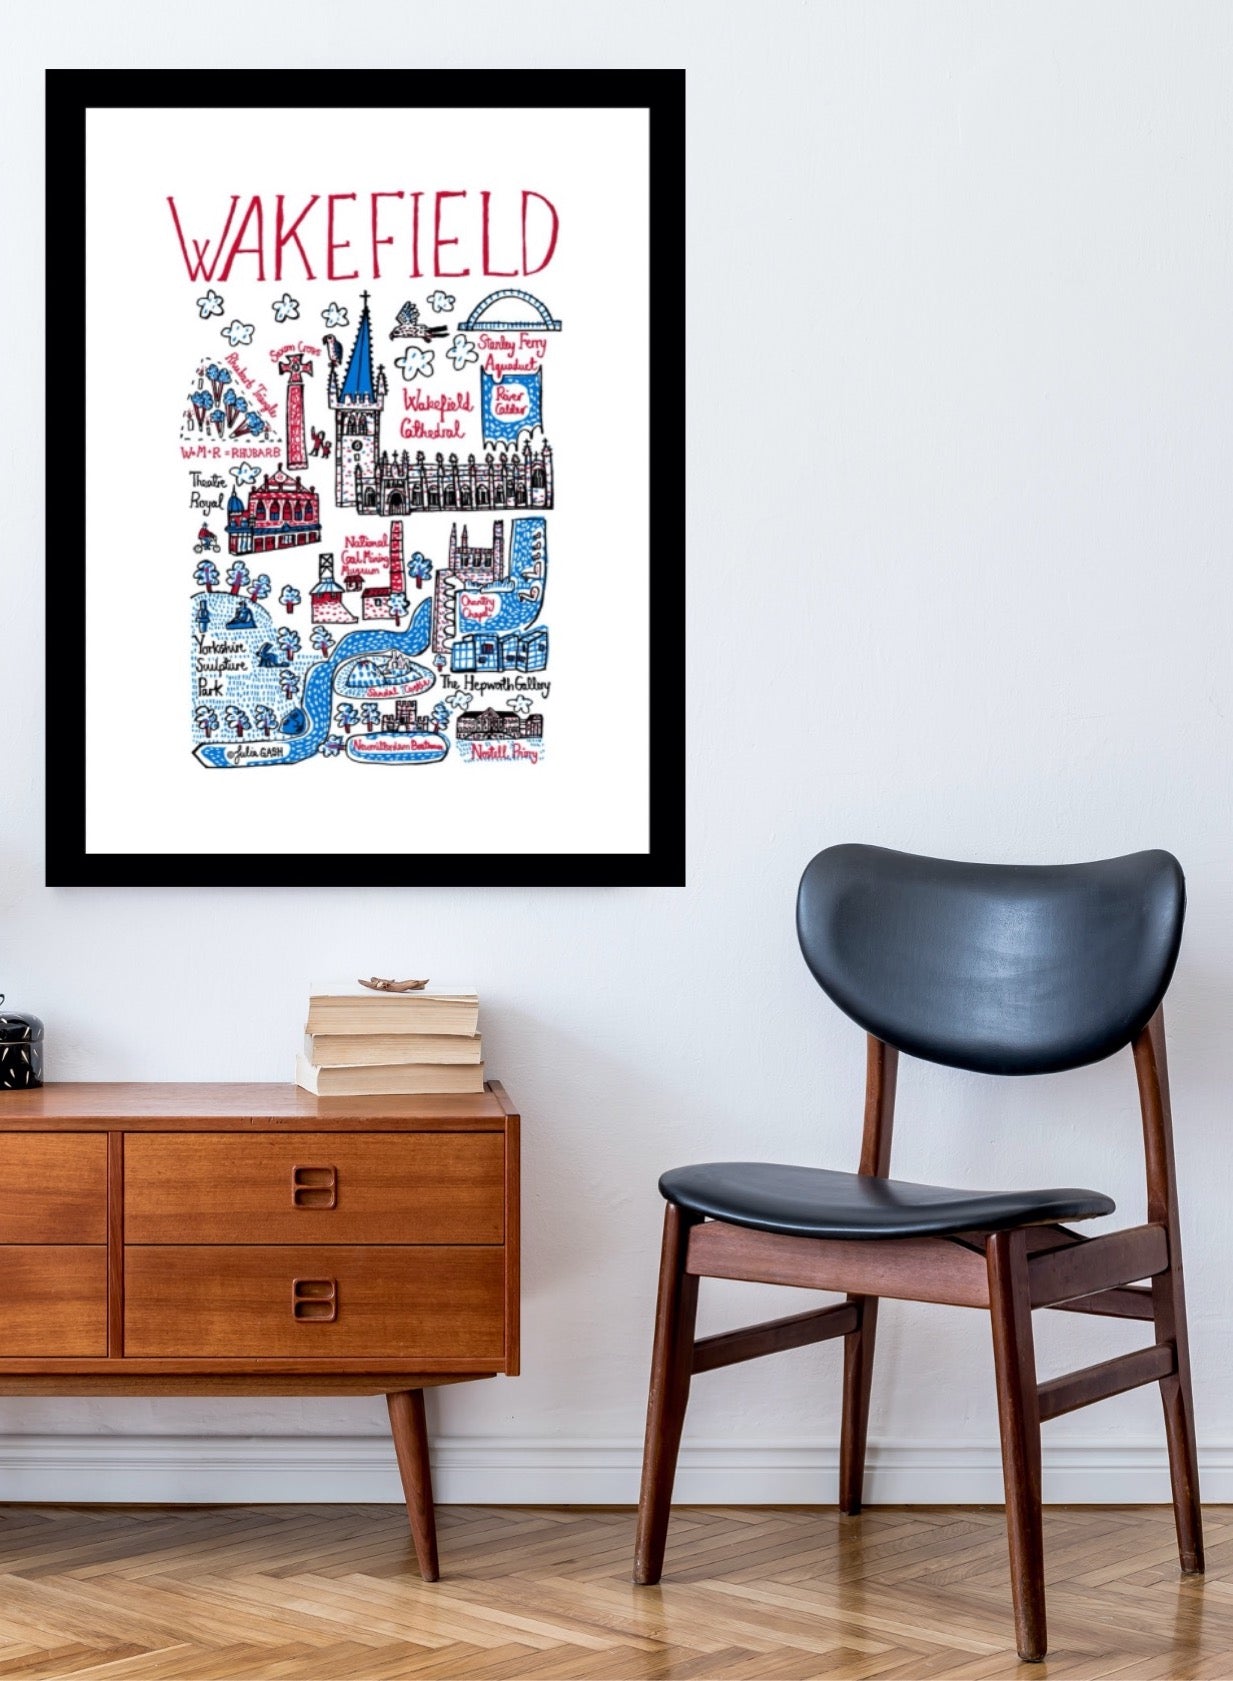 Wakefield, Yorkshire Contemporary Map Illustration Art Print by Julia Gash